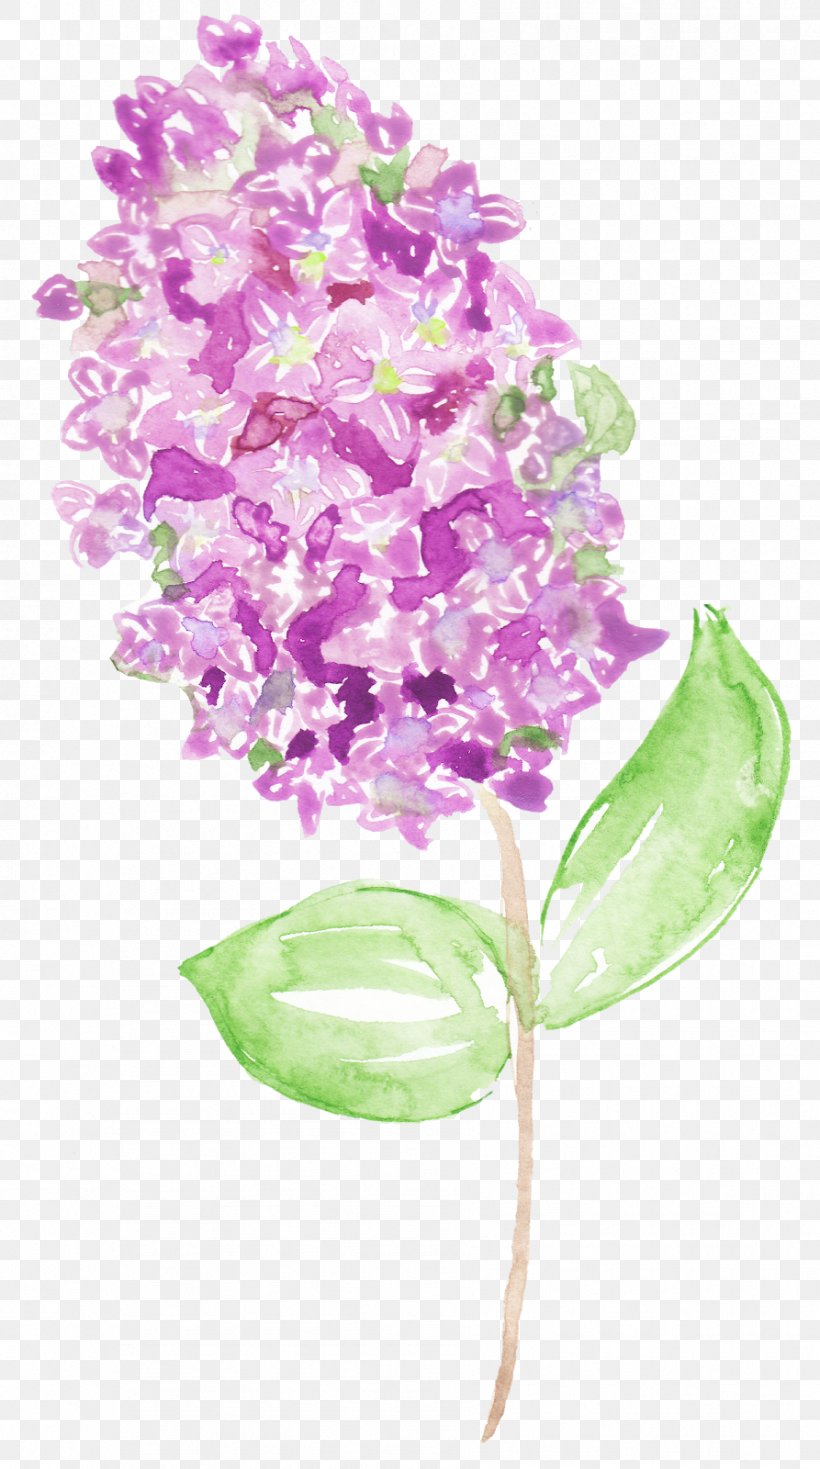 Watercolor Painting Image Flower Vector Graphics, PNG, 893x1600px, Watercolor Painting, Cooktown Orchid, Cut Flowers, Dendrobium, Flower Download Free